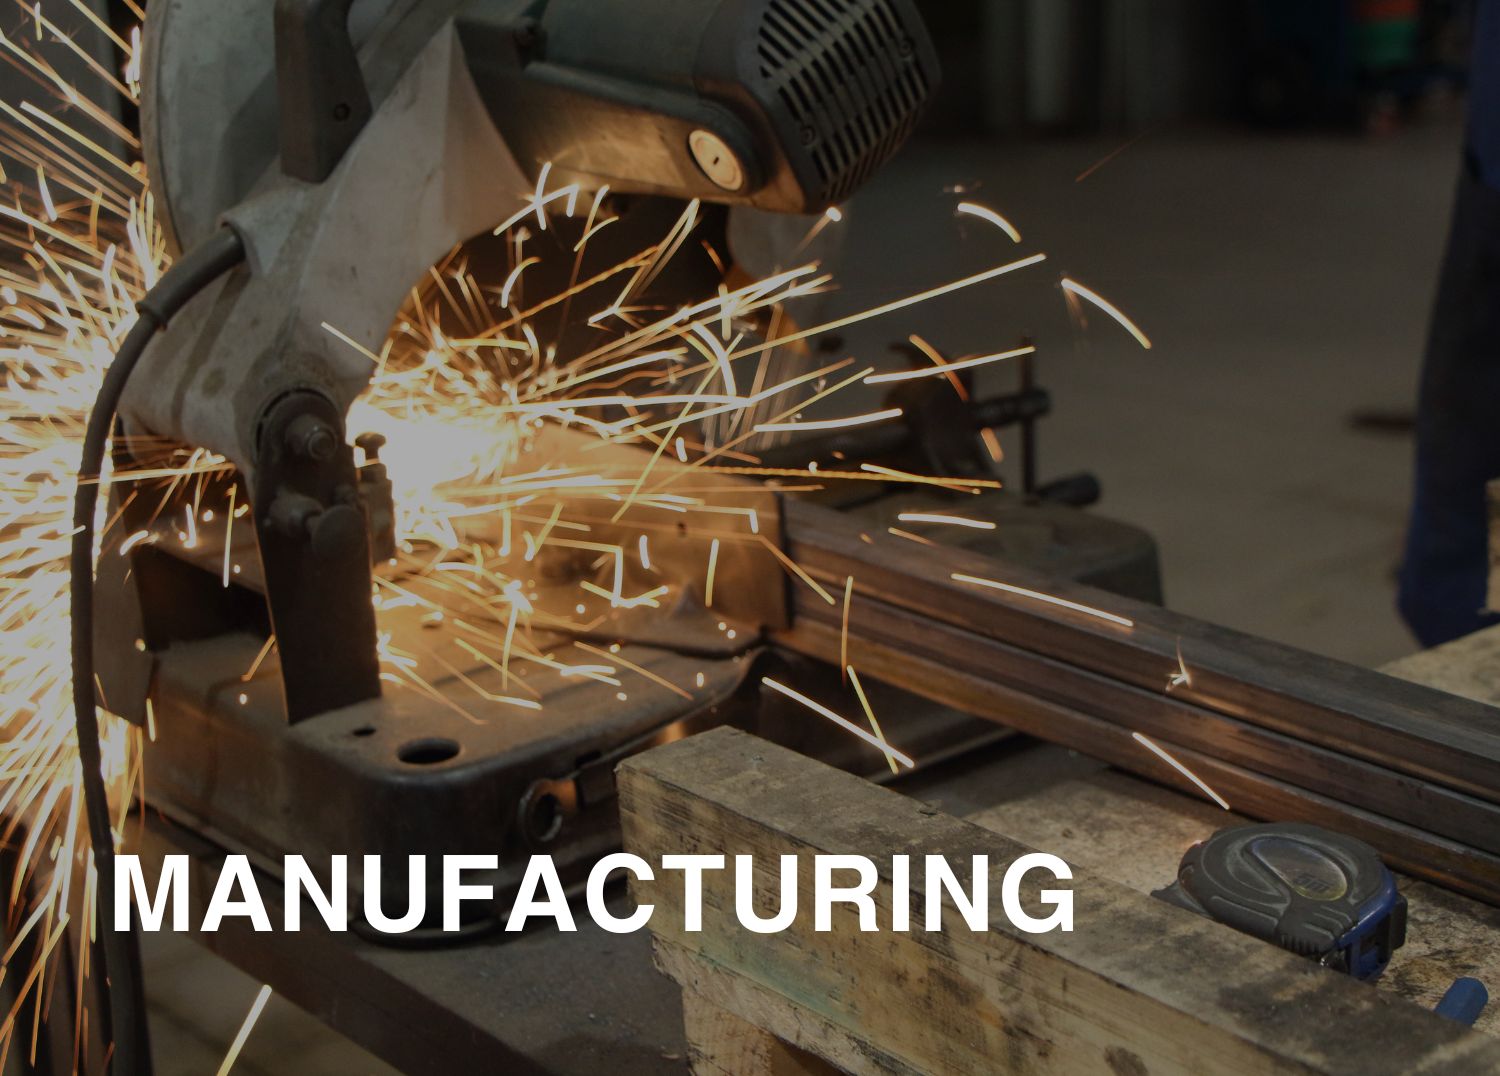 manufacturing industry